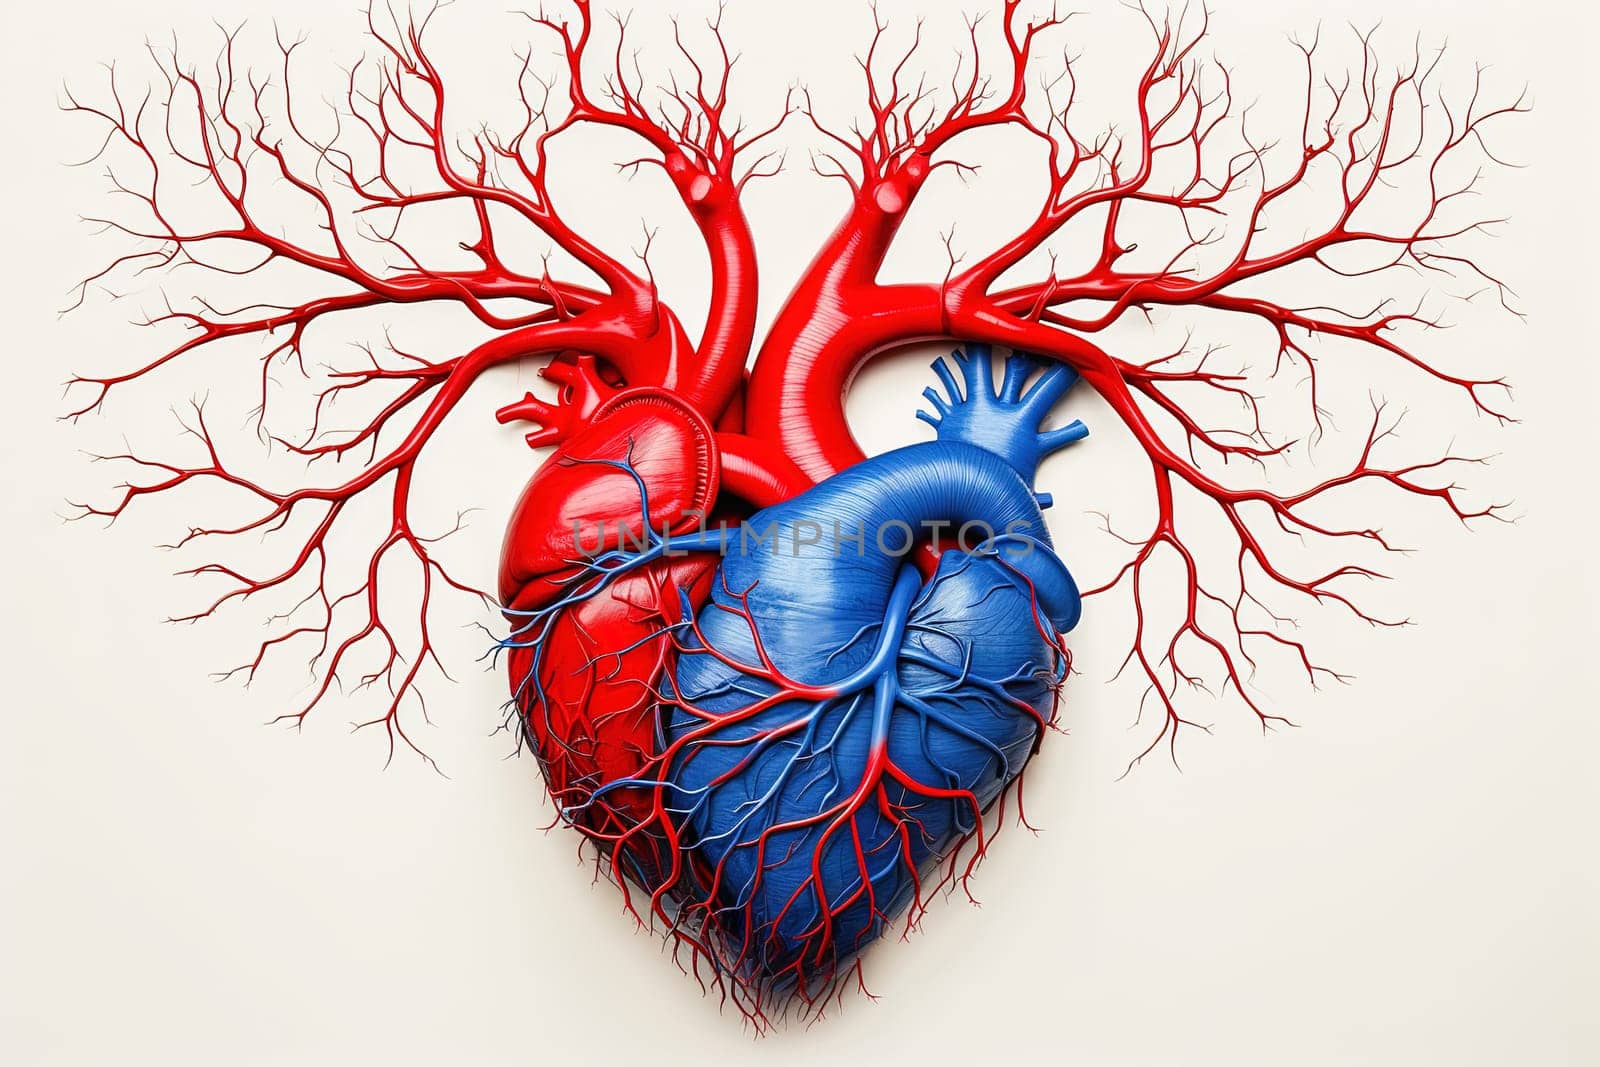 Red and blue model of a human heart. Heart care concept. by Yurich32